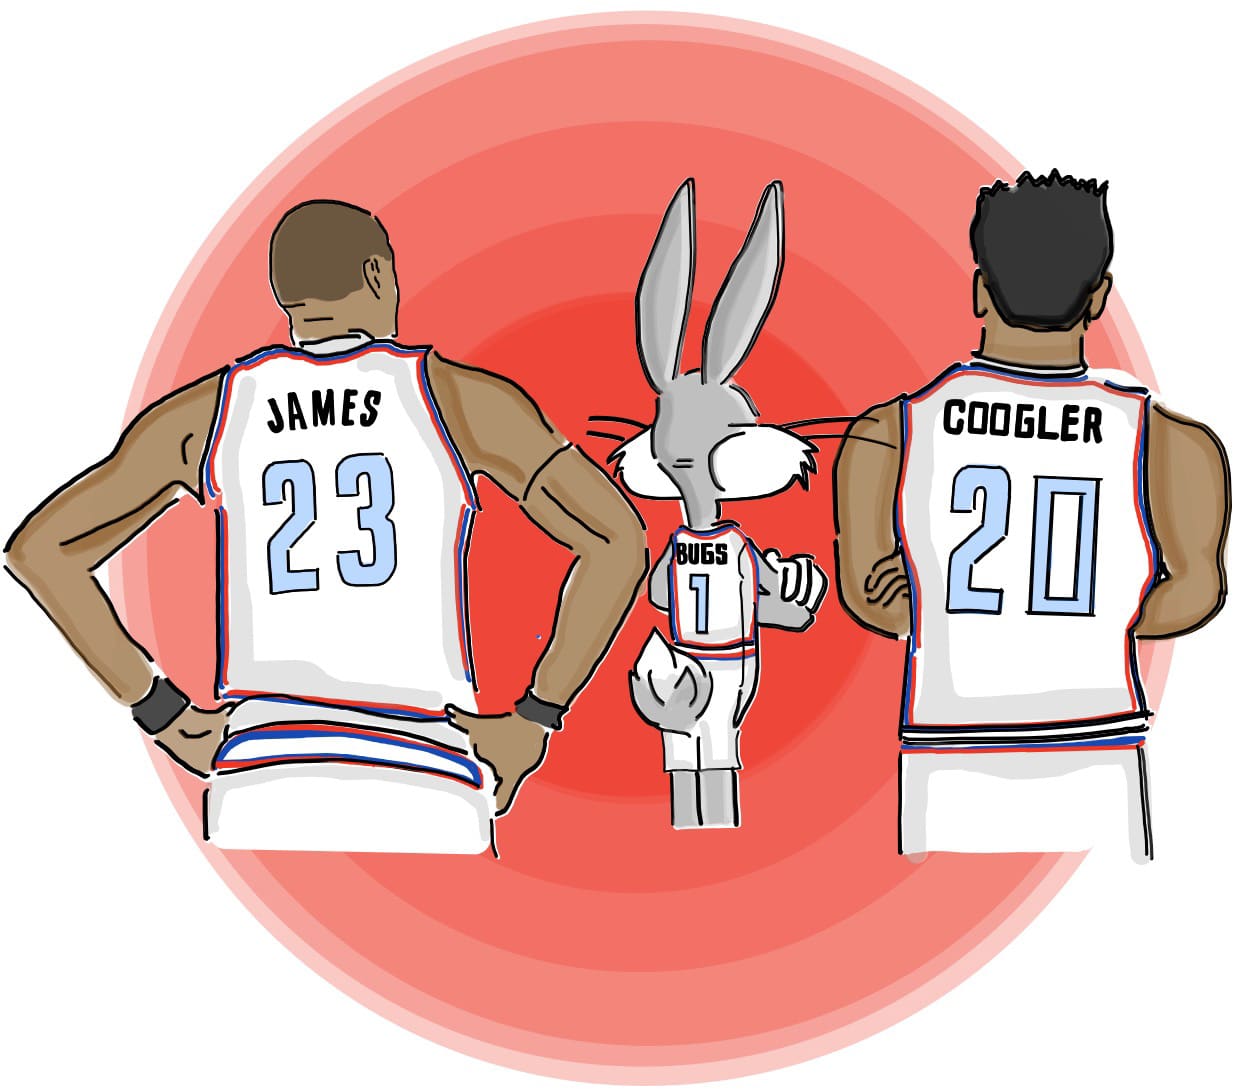 LeBron James and Ryan Coogler team up for Space Jam 2 - The